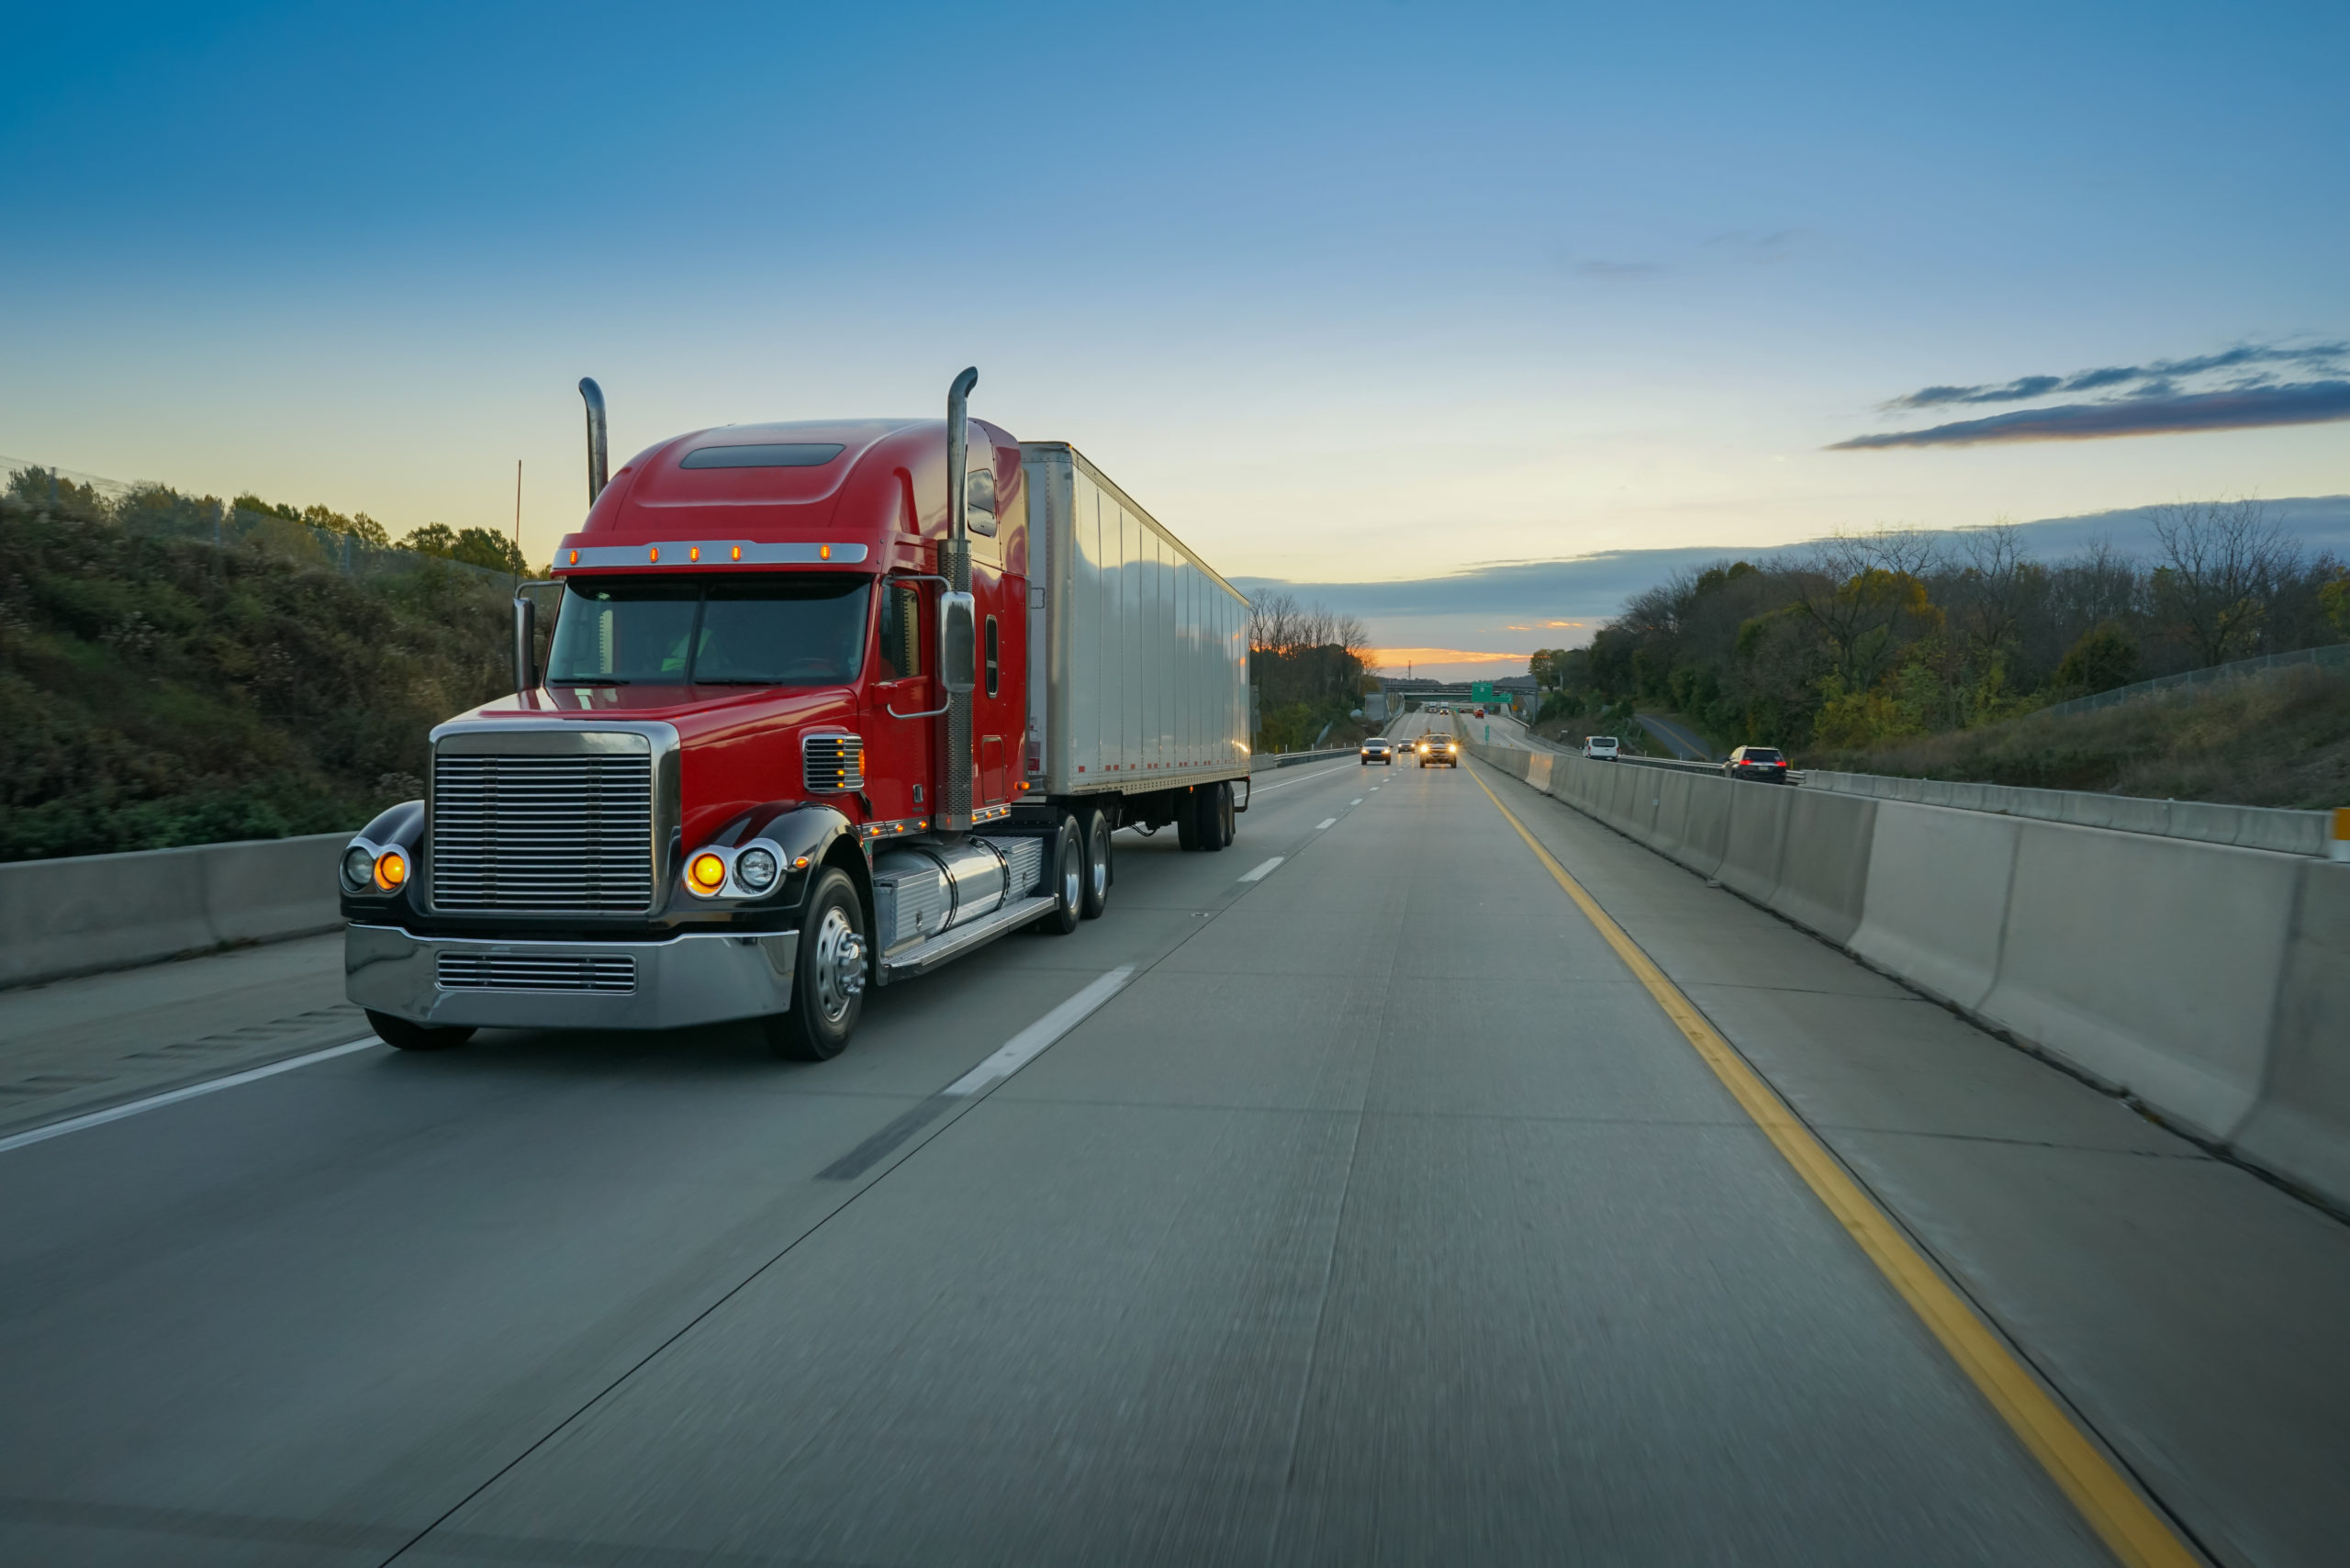 Rate-Oriented Trucking Company Owner Picks Forward Image